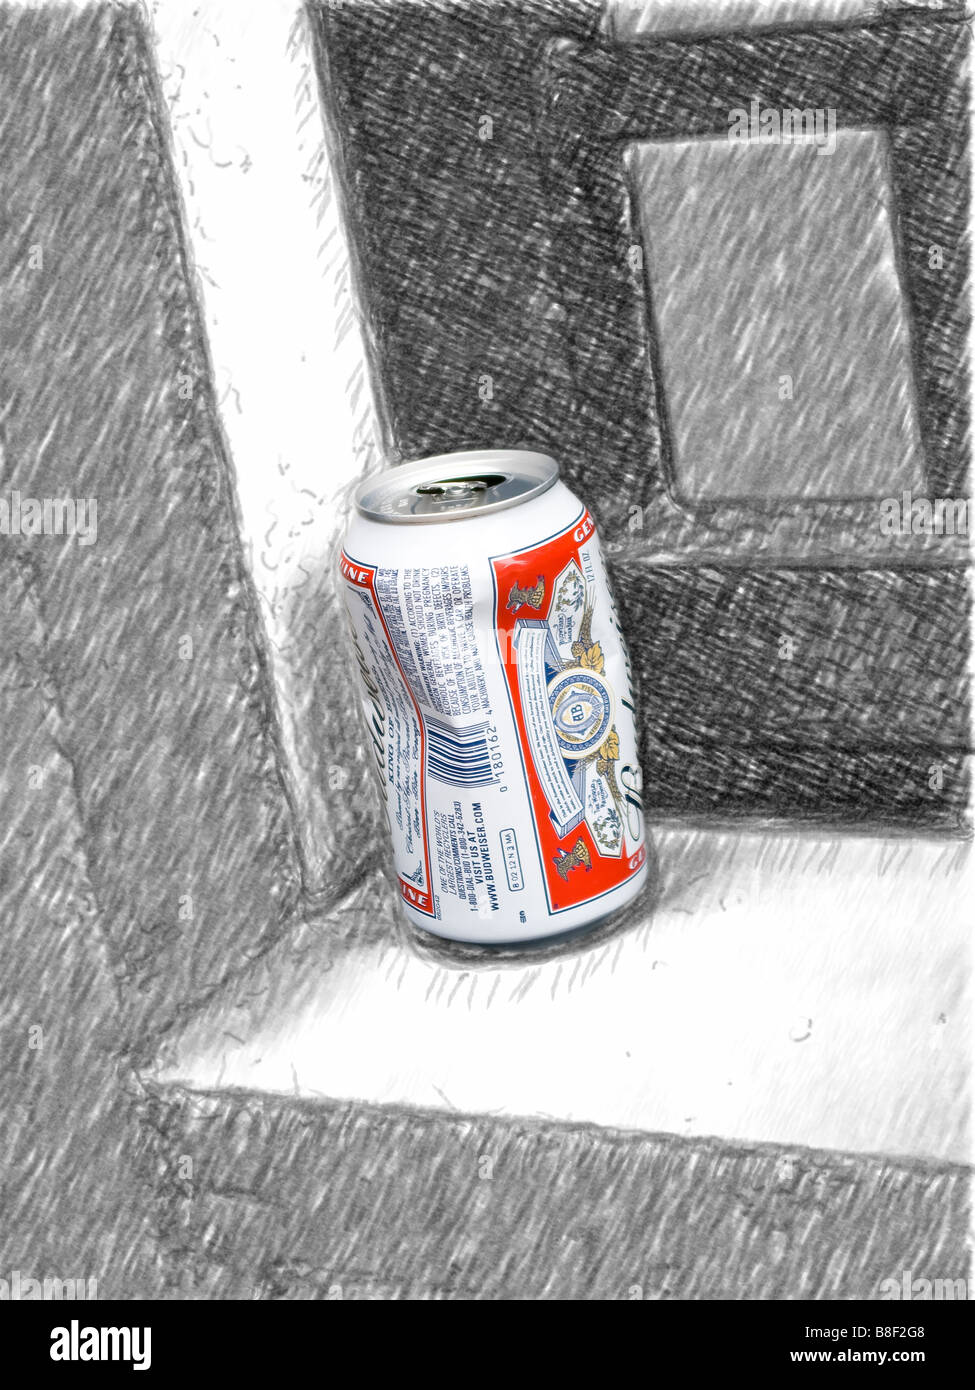 Crumpled Budweiser beer can sitting on window sill combo of photograph and pencil sketch Stock Photo